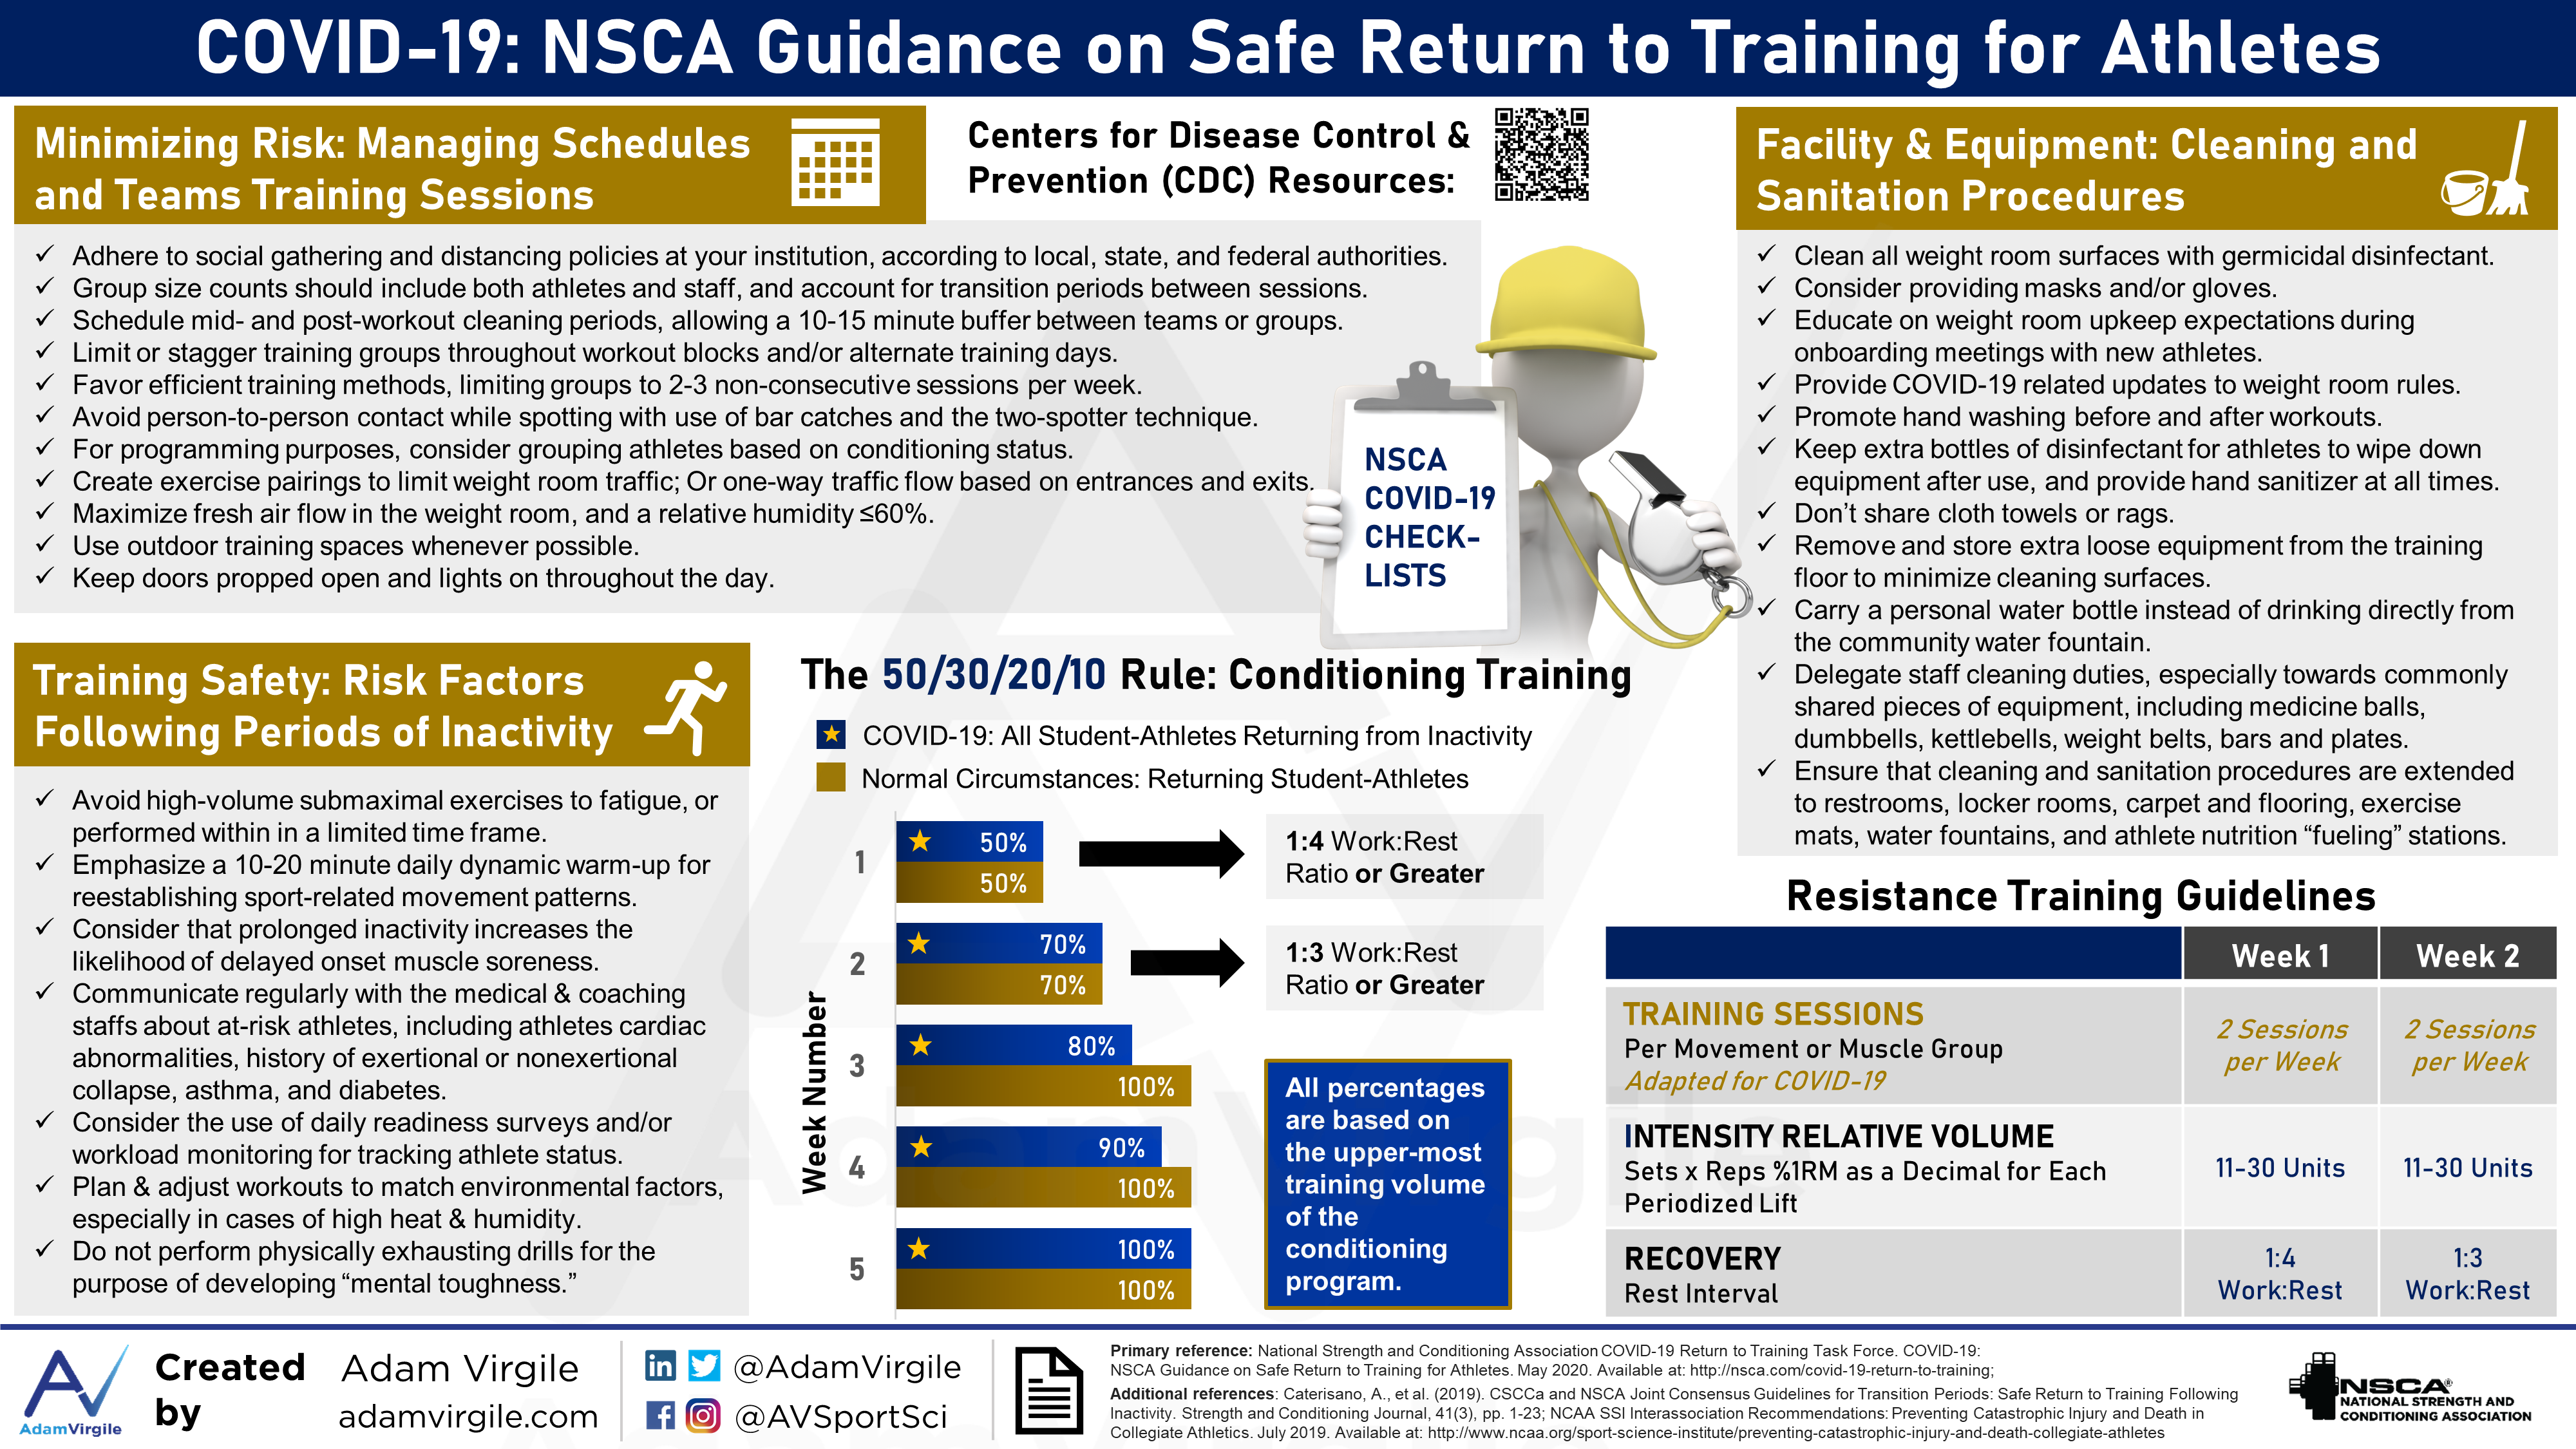 COVID-19: NSCA Guidance on Safe Return to Training for Athletes.